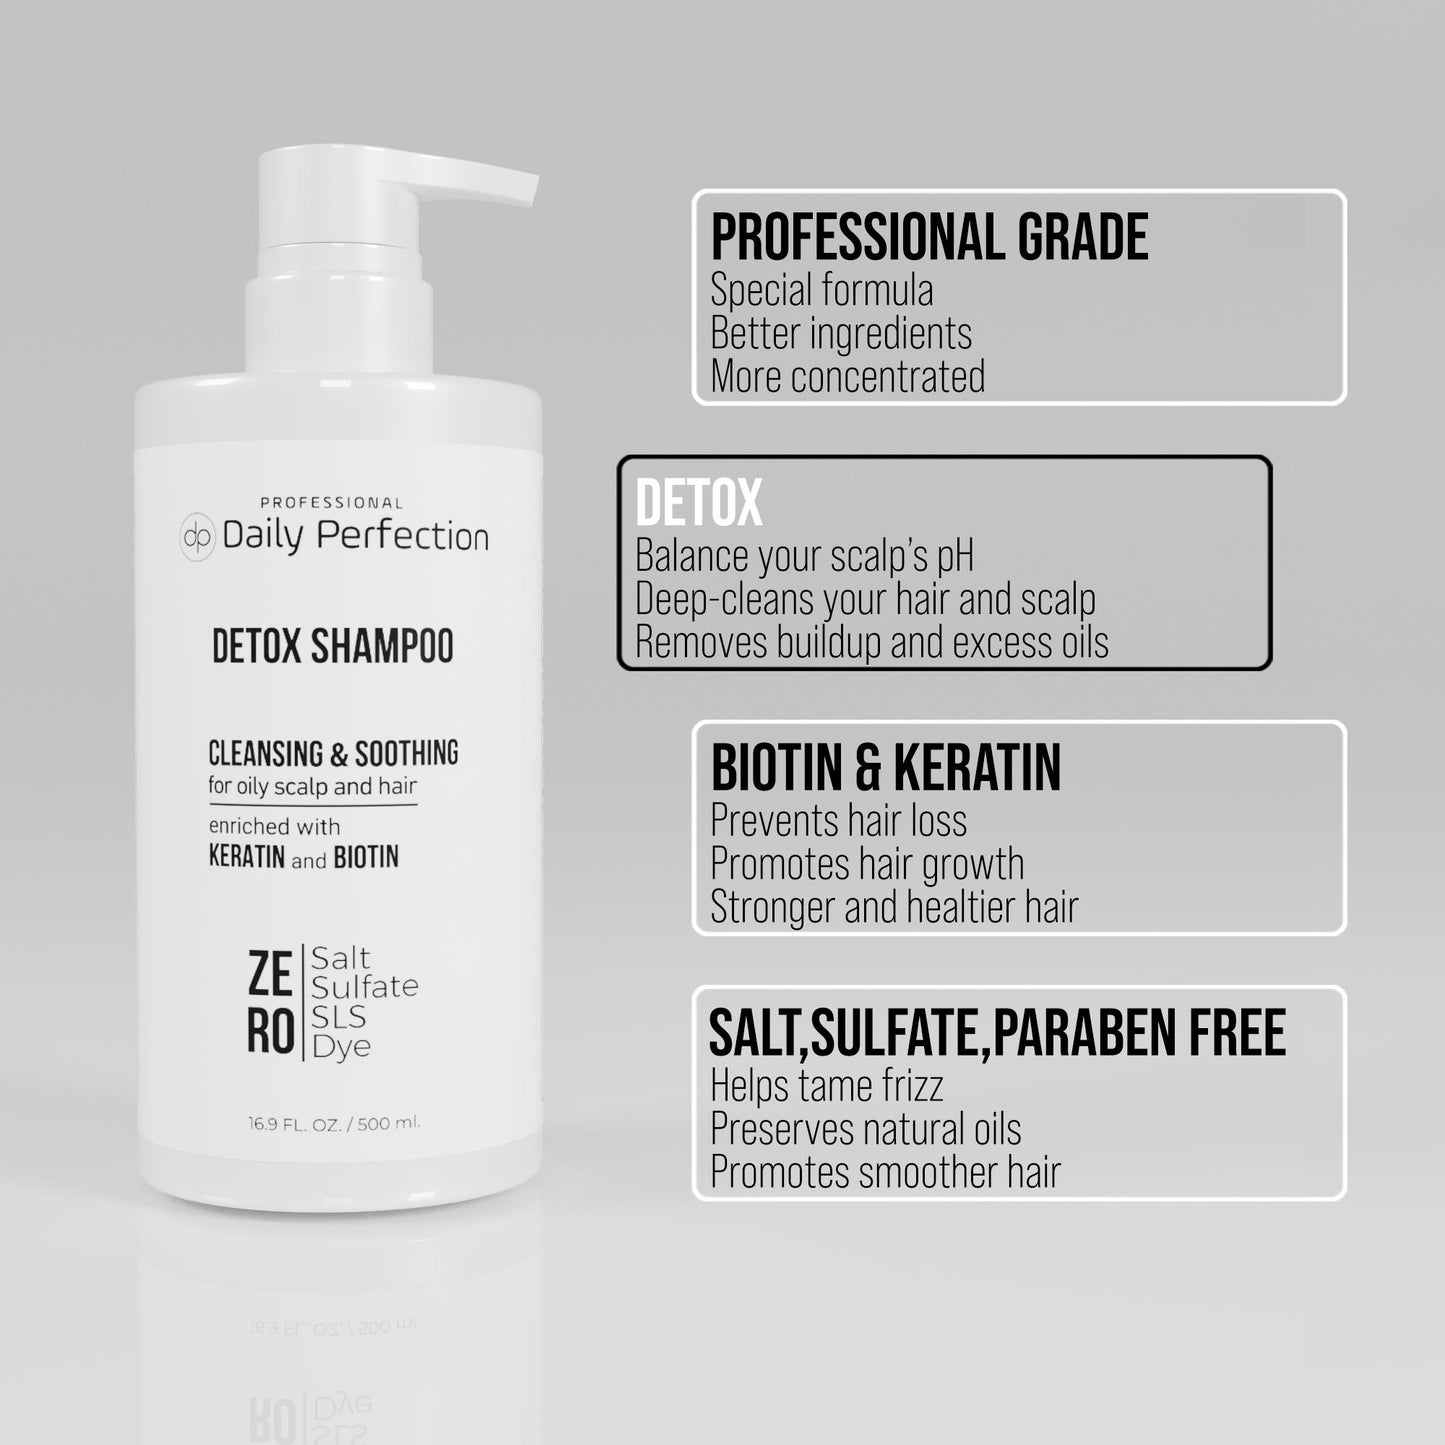 infographic explains the product benefits in four bullet points for Daily Perfection Detox Shampoo